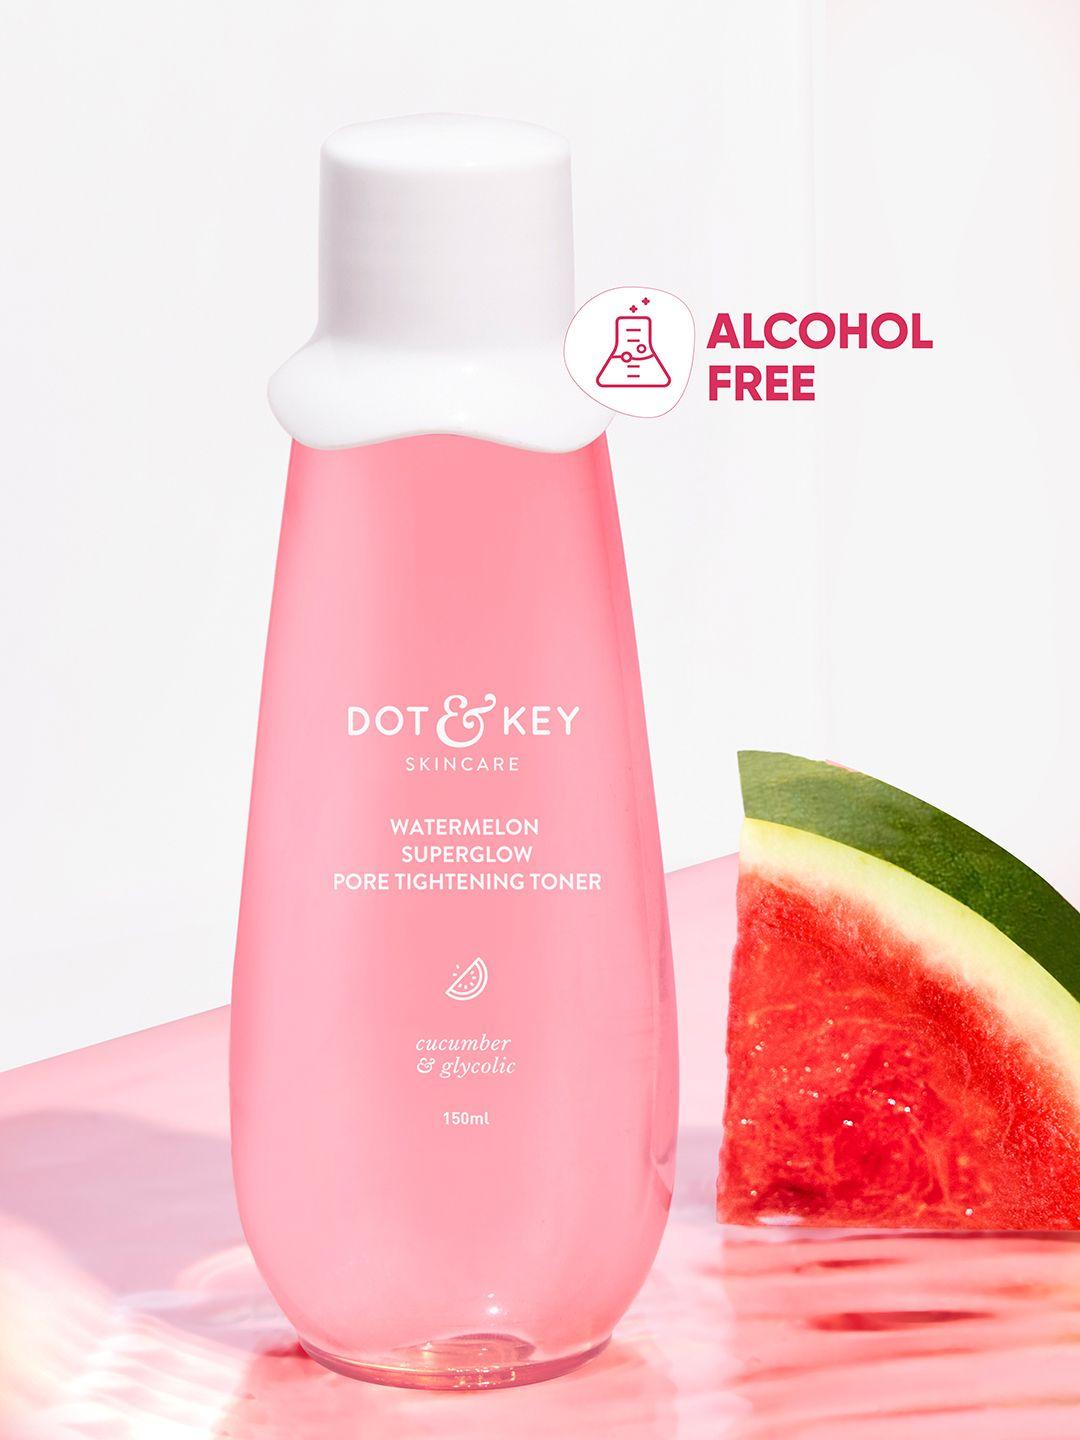 dot & key watermelon aha pore tightening toner with glycolic for glowing skin - 150ml